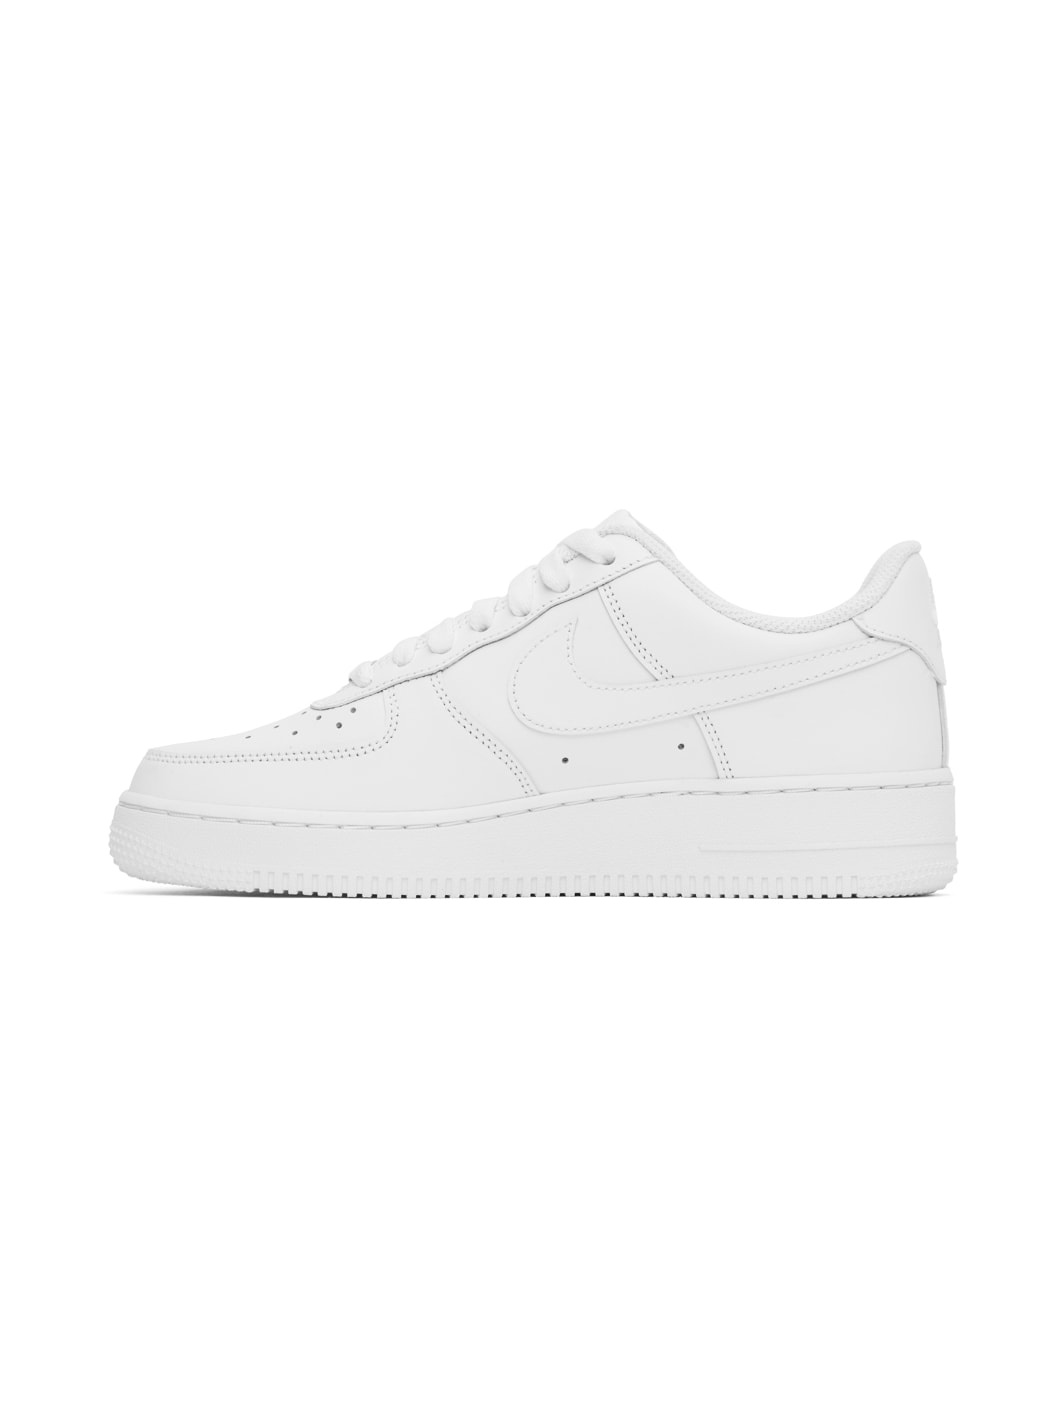 White Air Force 1 '07 Sneakers - 3